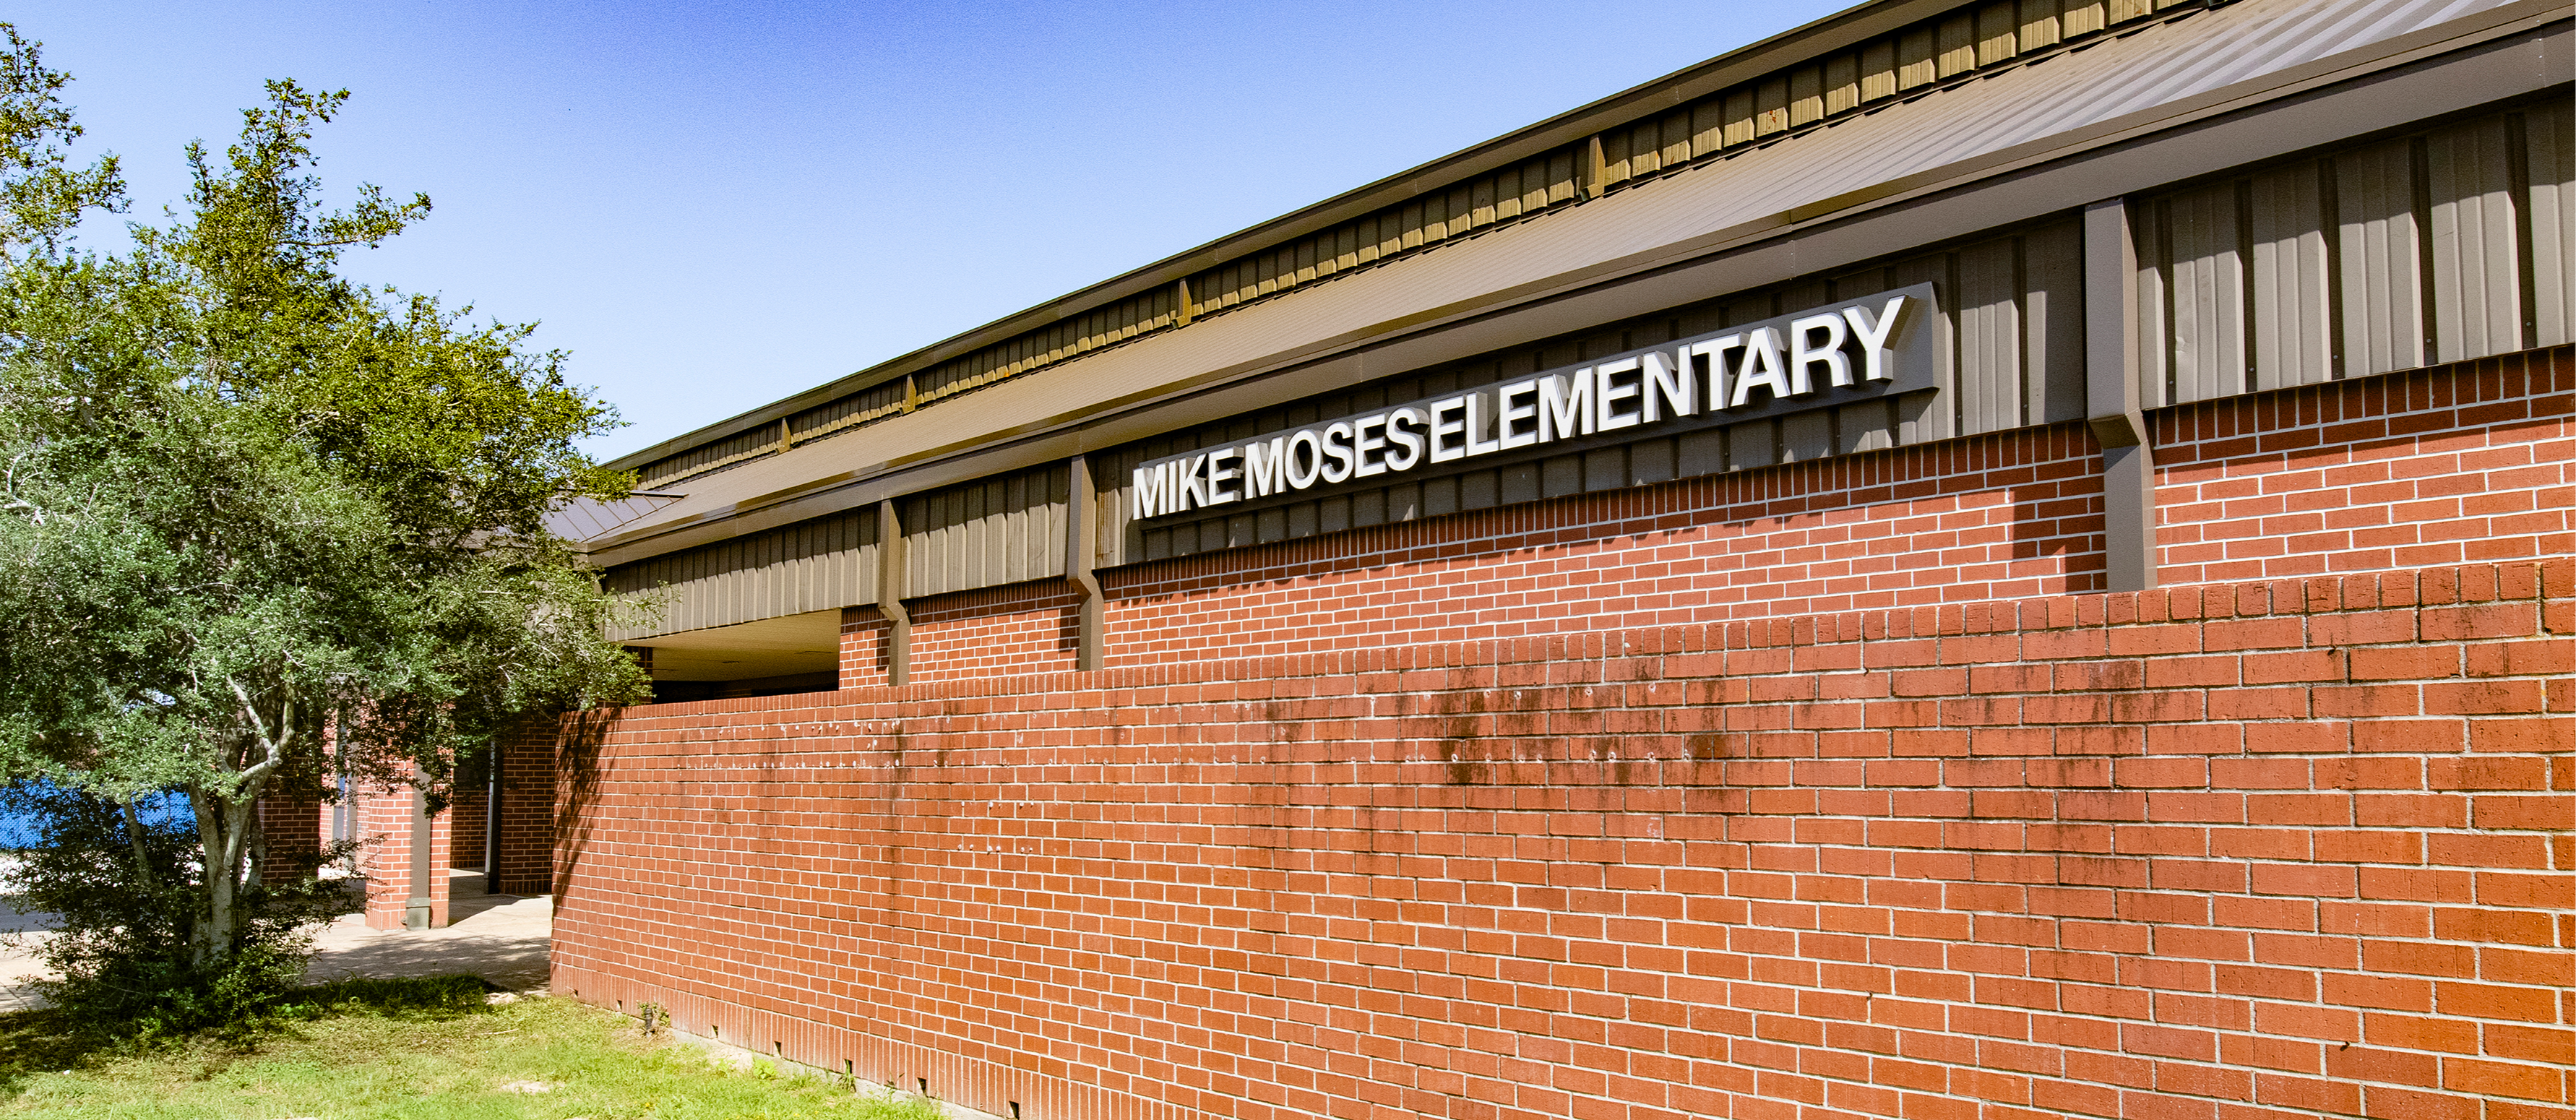 Mike Moses Elementary School